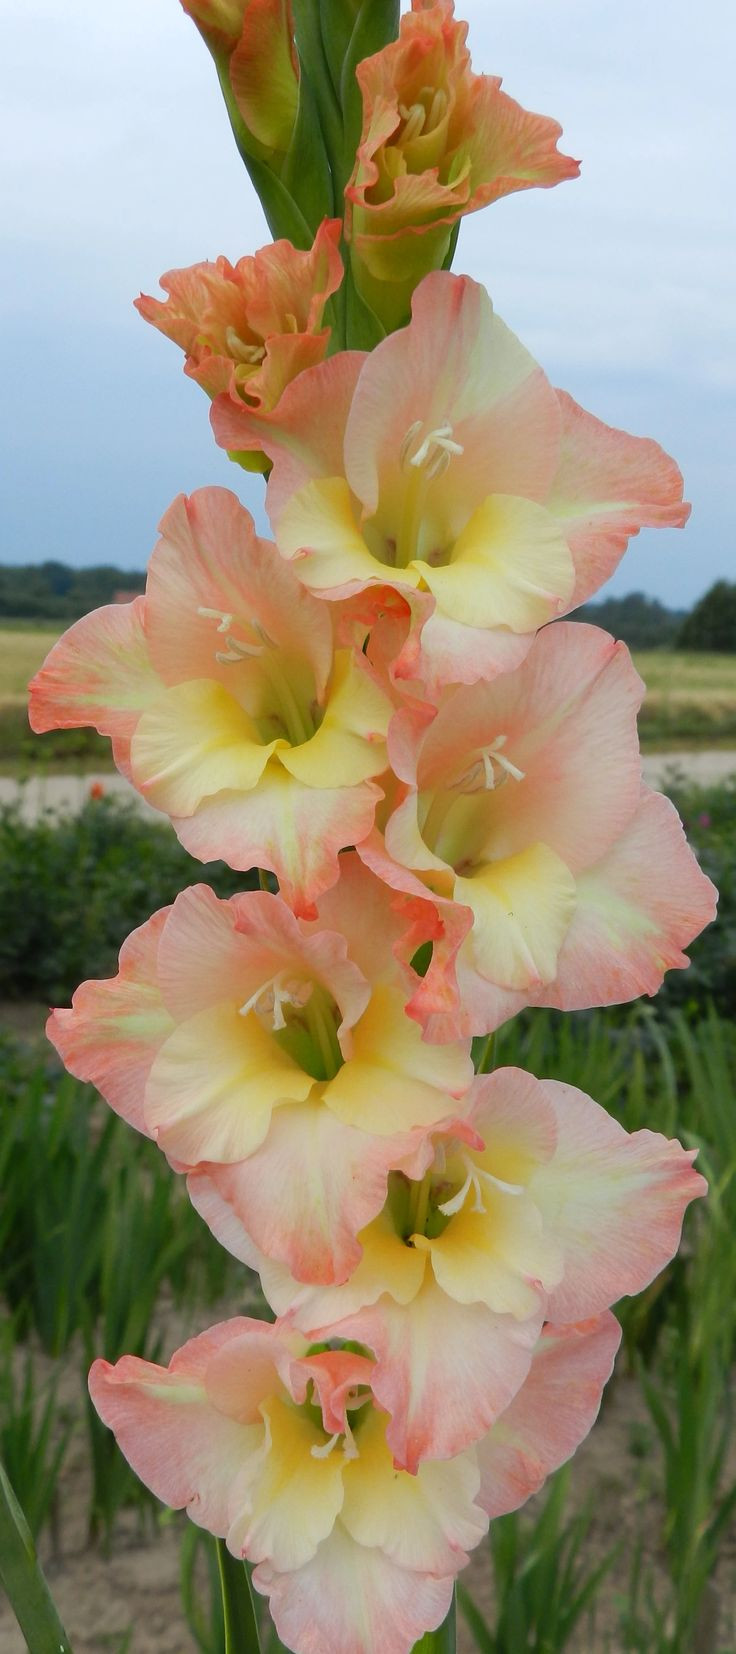 gladiolus vase for sale of 6306 best flowers images on pinterest beautiful flowers pretty with baby love 143